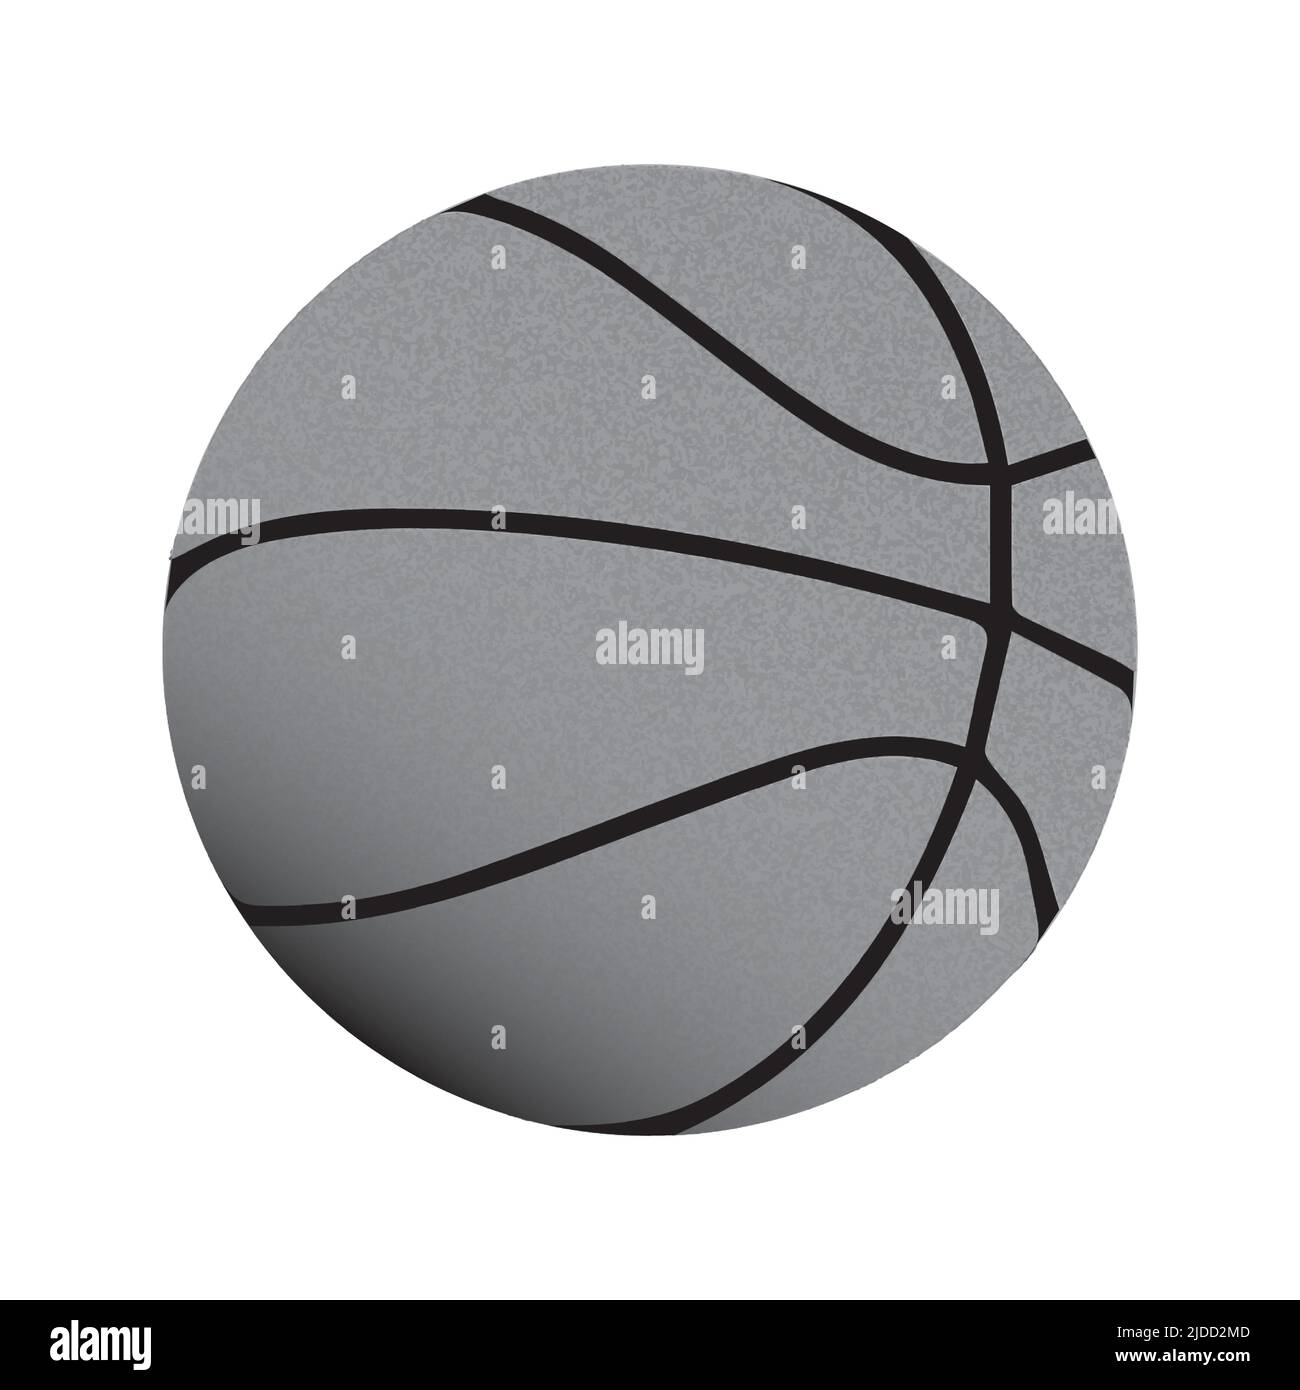 Vector illustration of gray collered realistic Basketball clipart drawing. Vector illustration Stock Vector